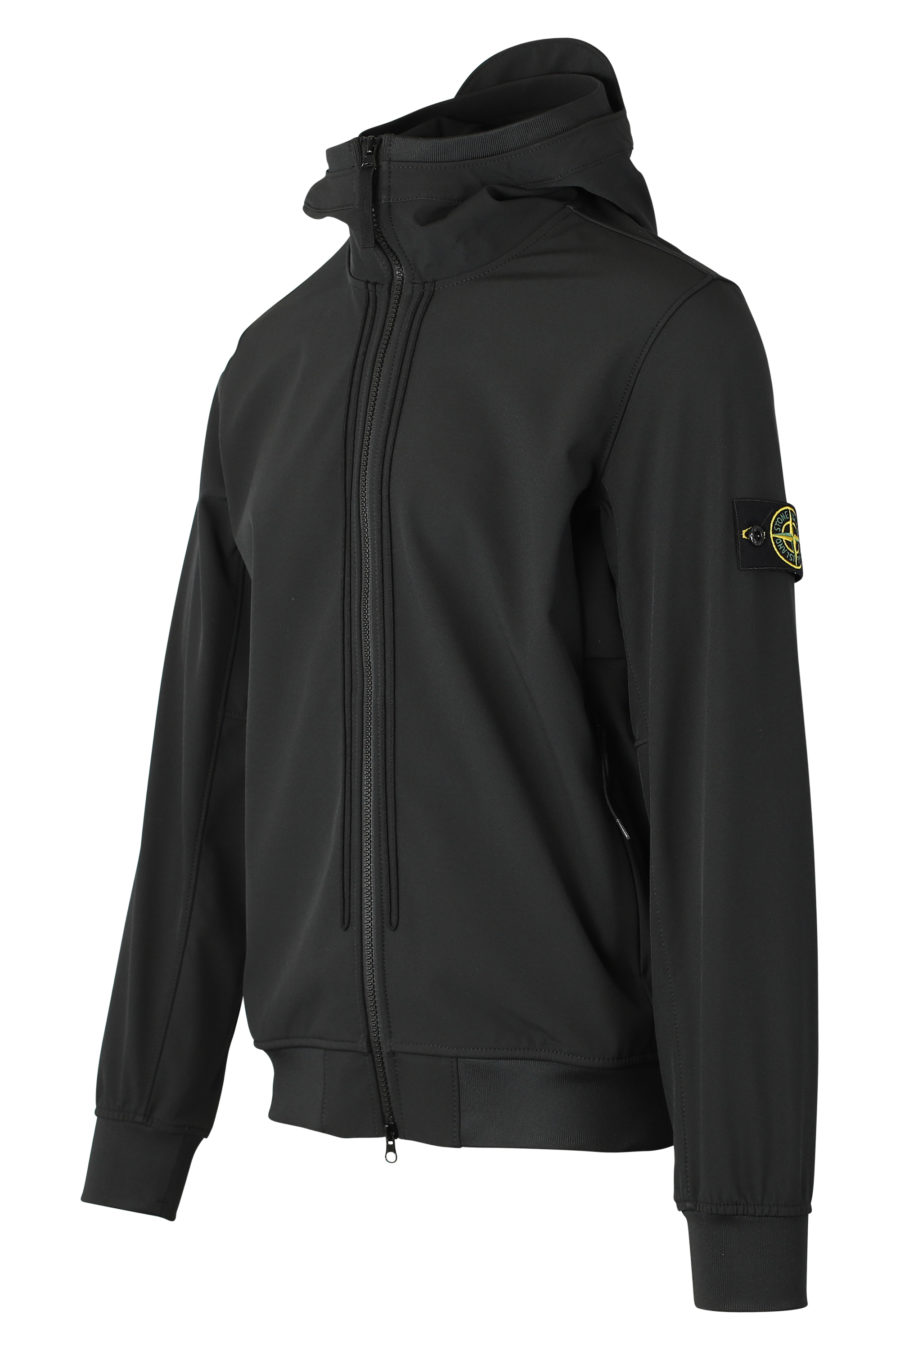 Black jacket with hood and logo patch - IMG 9307